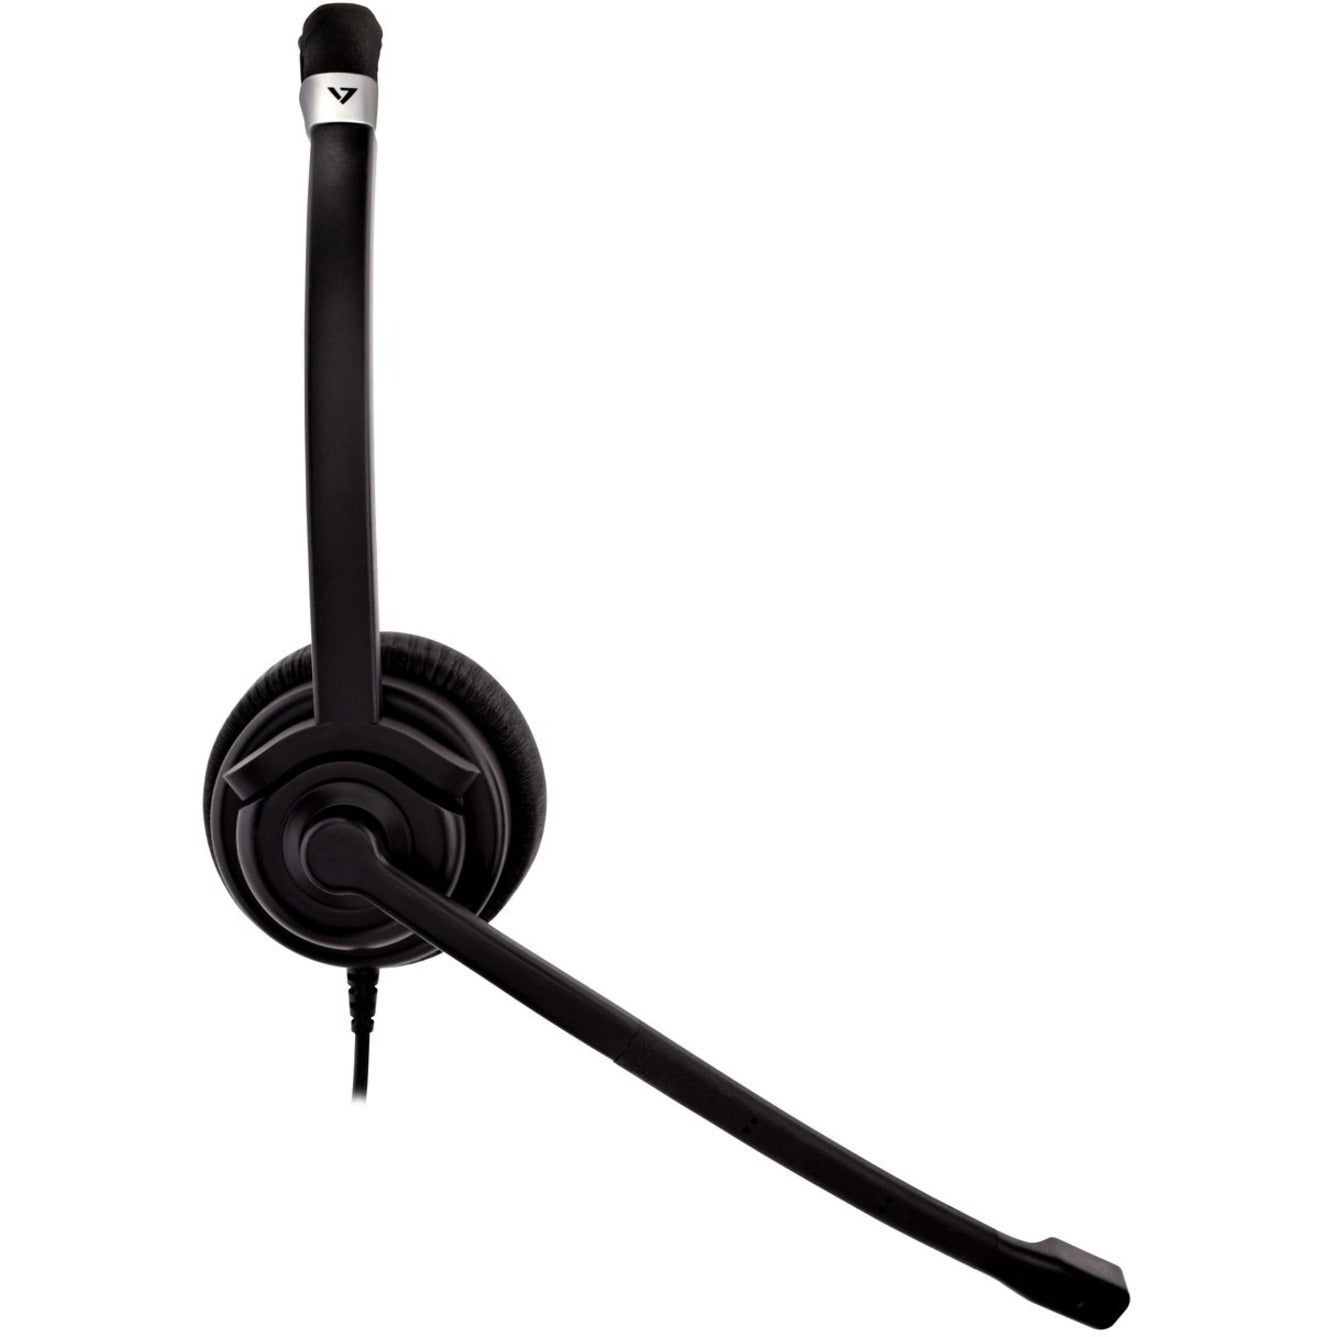 V7 HU411 Deluxe USB Mono Headset with Boom Mic, Over-the-head, Noise Cancelling, 2 Year Warranty